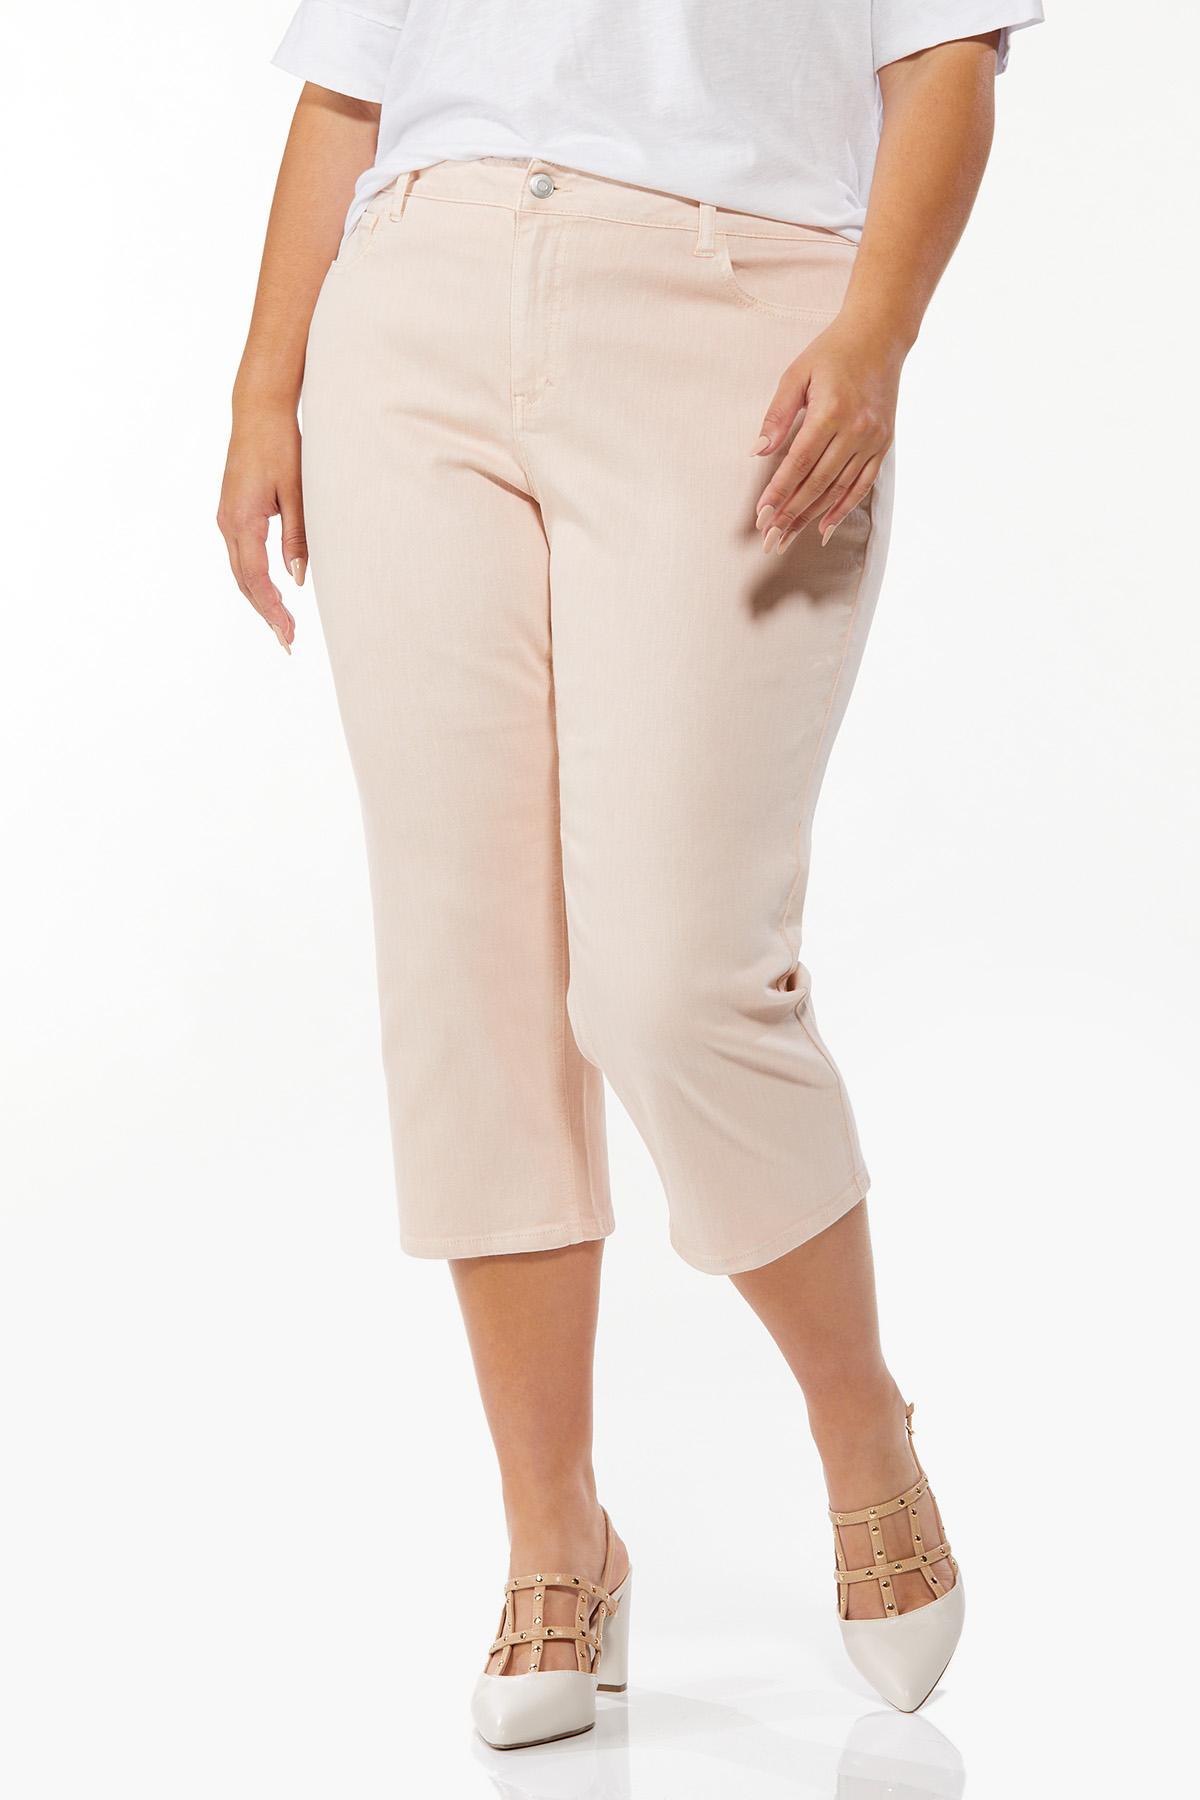 Plus Size Cropped Colored Jeans